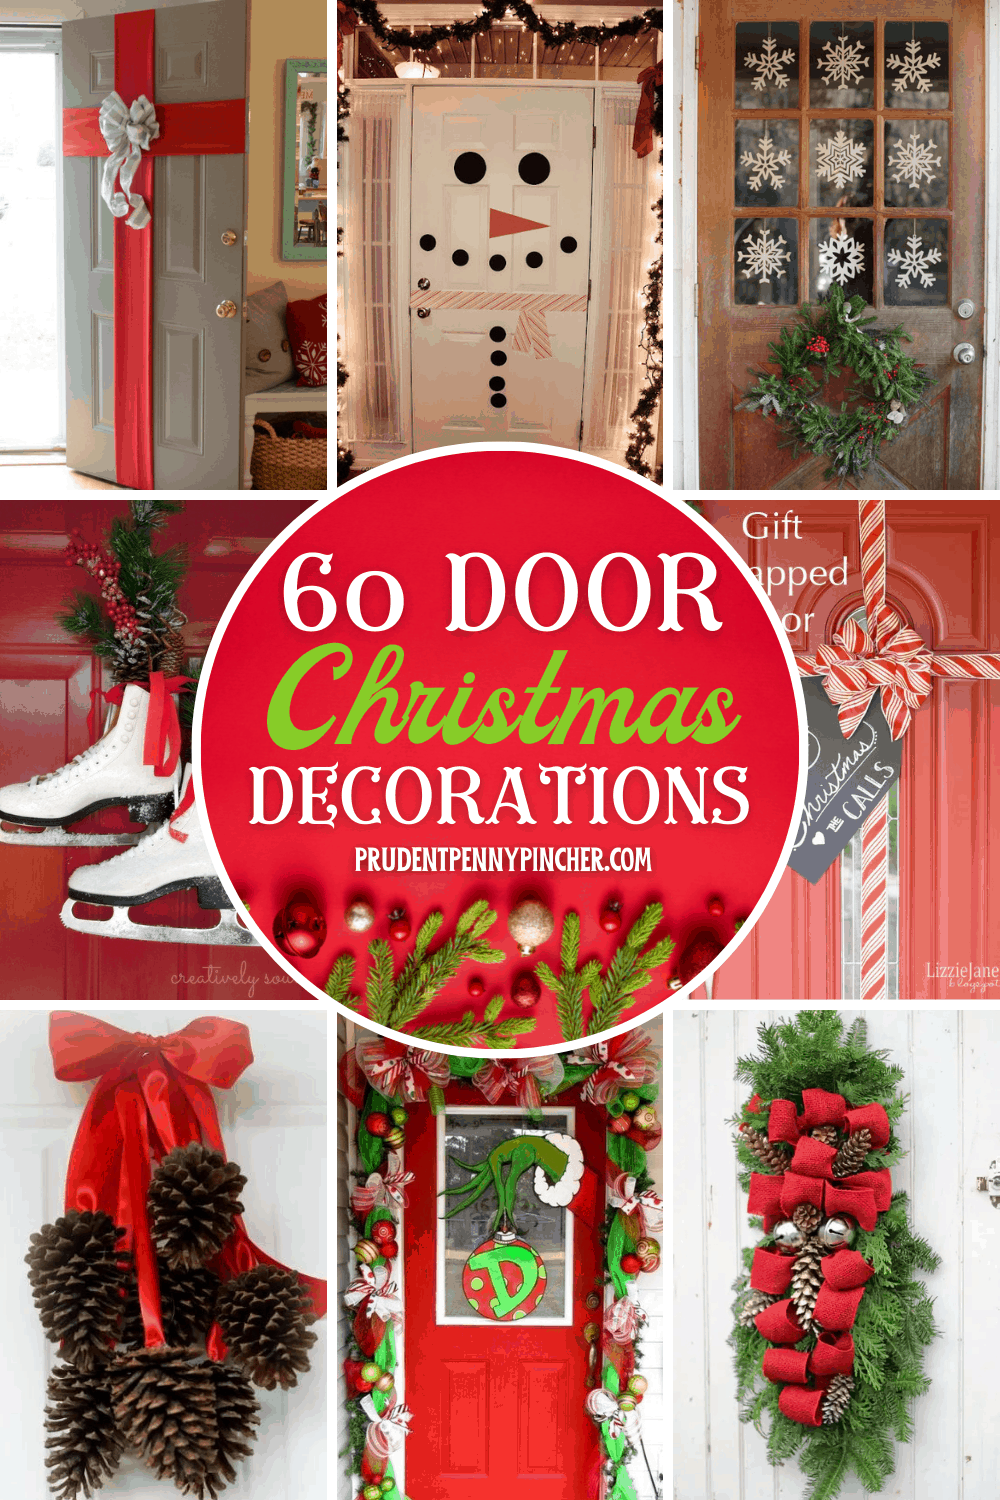 50 Quick and Easy Holiday Decorating Ideas